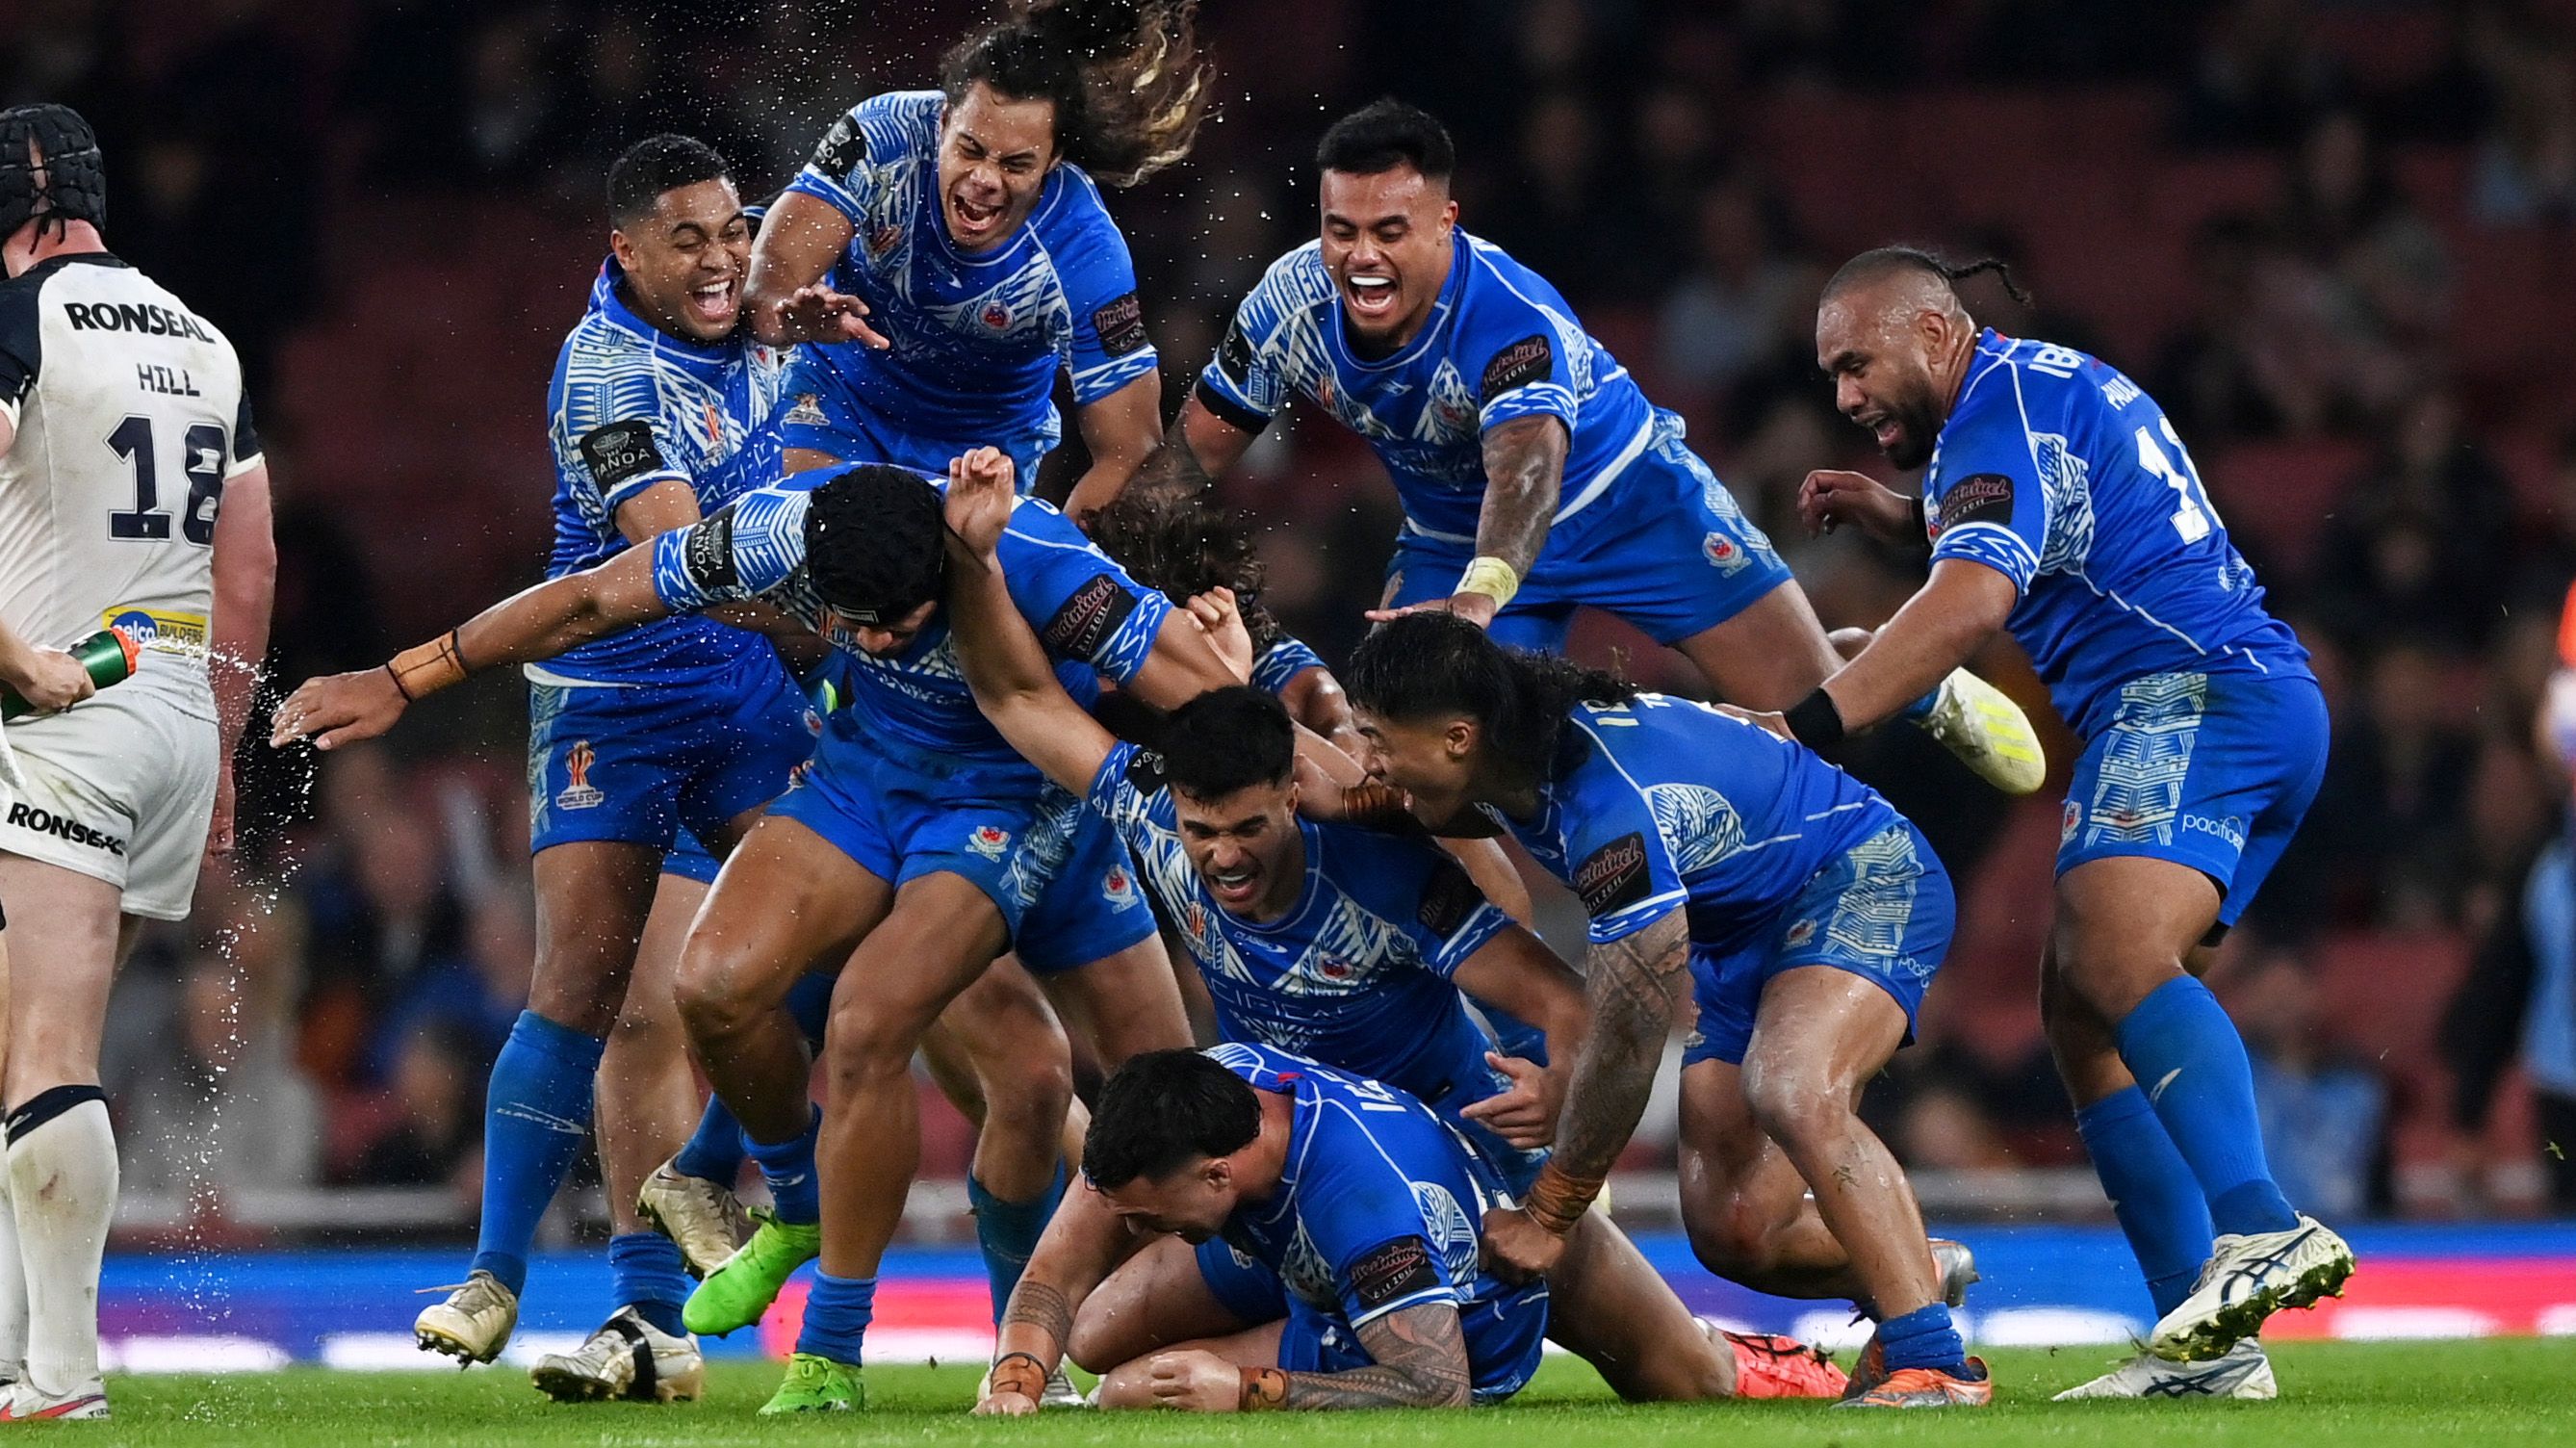 Samoa celebrate after Stephen Crichton kicked the winning golden point drop goal to win the Rugby League World Cup Semi-Final match between England and Samoa at Emirates Stadium on November 12, 2022 in London, England. (Photo by Gareth Copley/Getty Images)